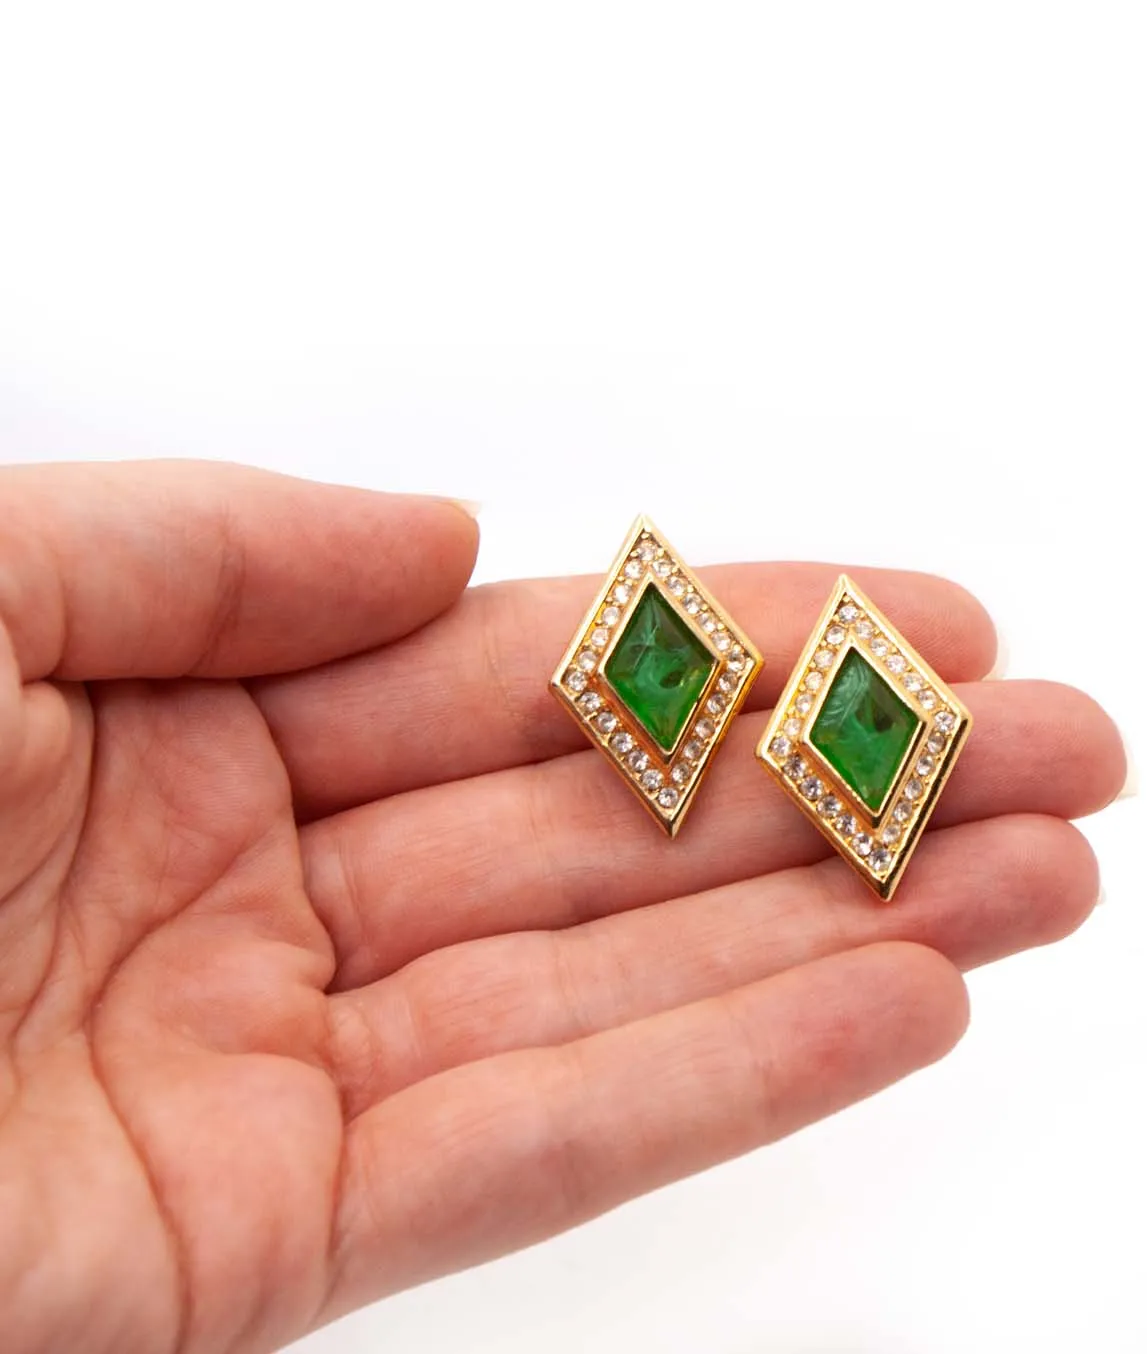 Christian Dior diamond shaped clip earrings with flawed emerald art glass and rhinestones held in hand